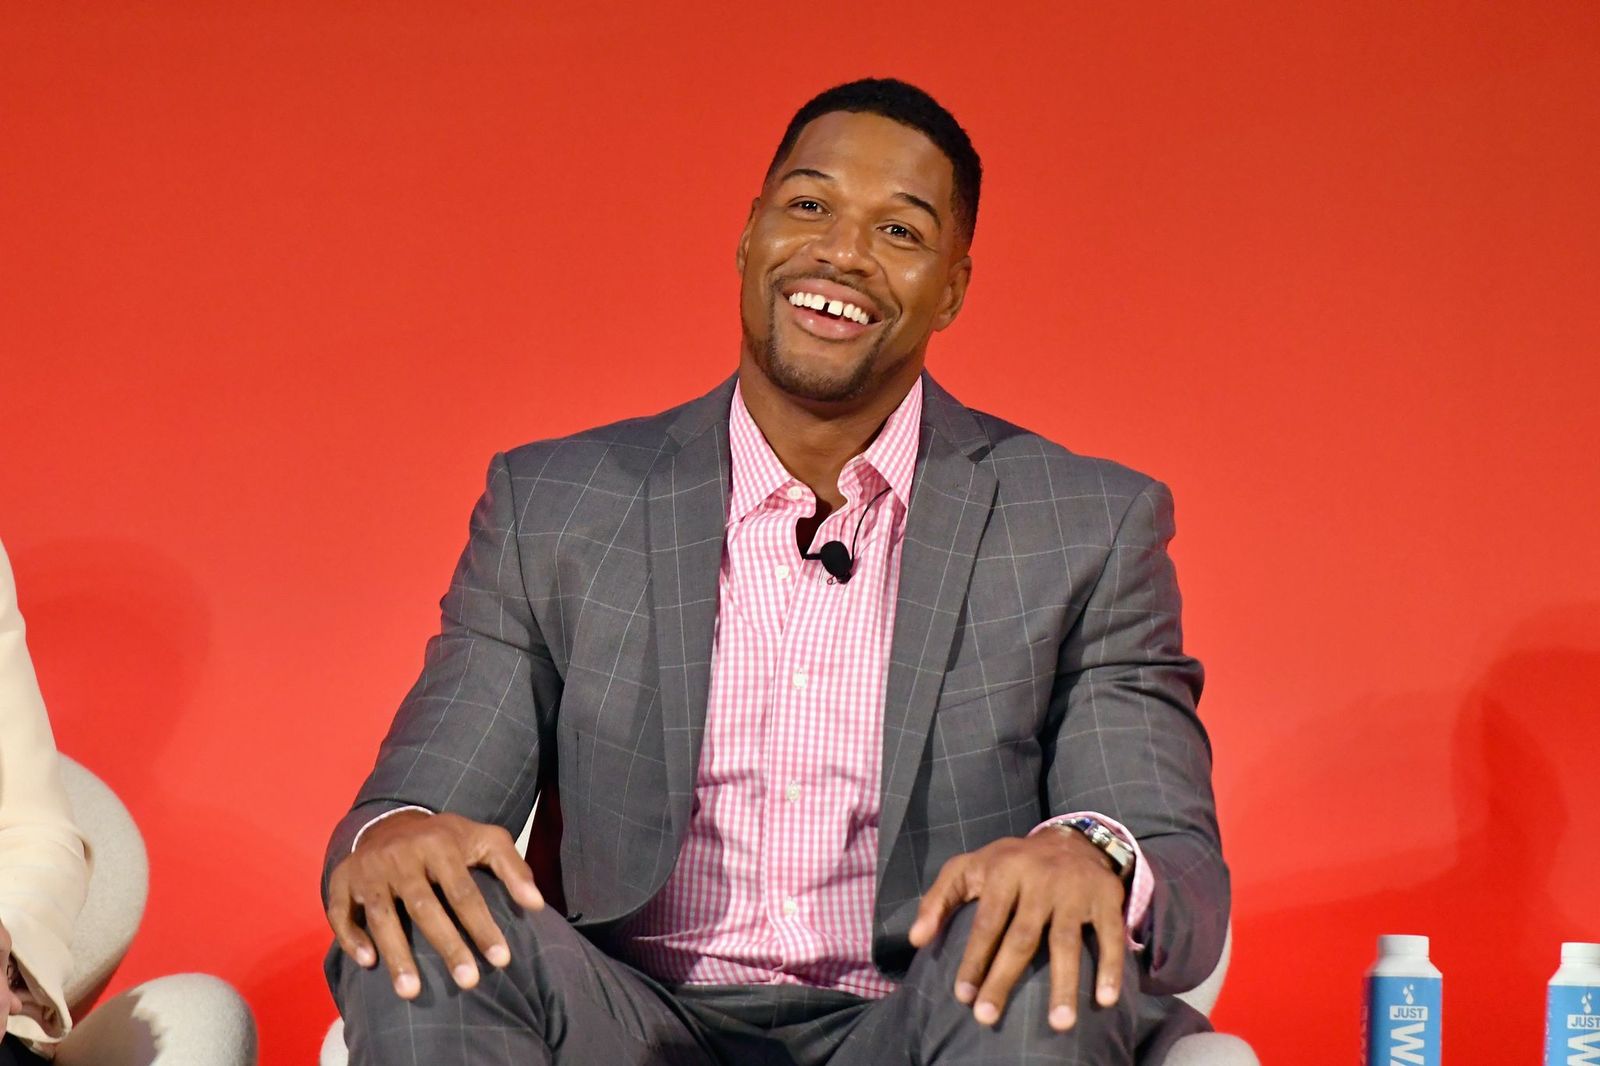 Legendary Super Bowl Champion & Emmy-nominated Fox NFL Sunday Analyst Michael Strahan speaks onstage at the Fox NFL Town Hall panel at The Town Hall during the  2016 Advertising Week in New York on September 28, 2016 in New York City. | Photo: Getty Images